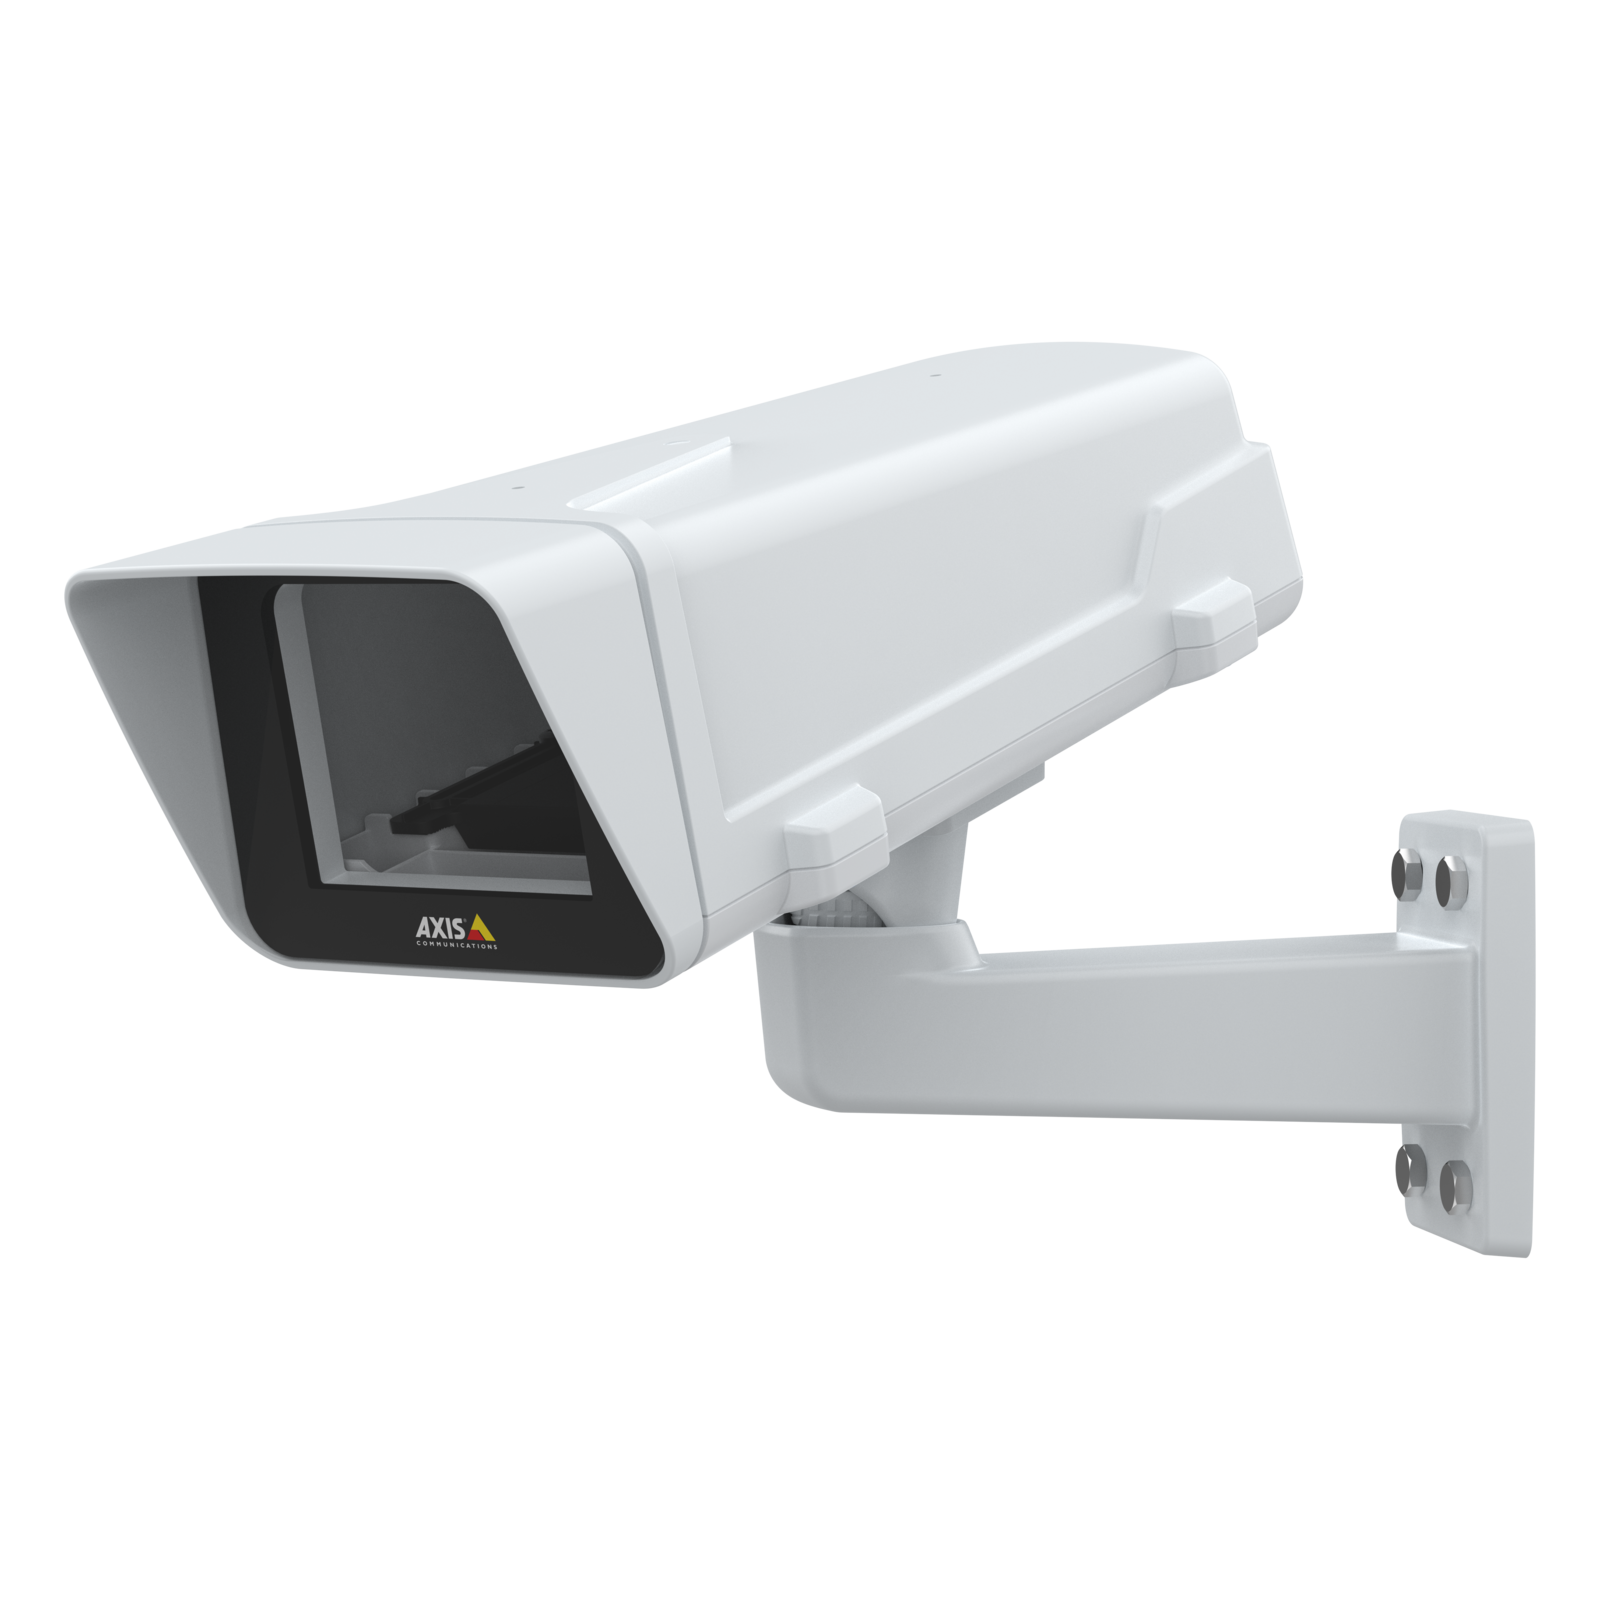 AXIS T93F10 Outdoor Housing | Axis Communications